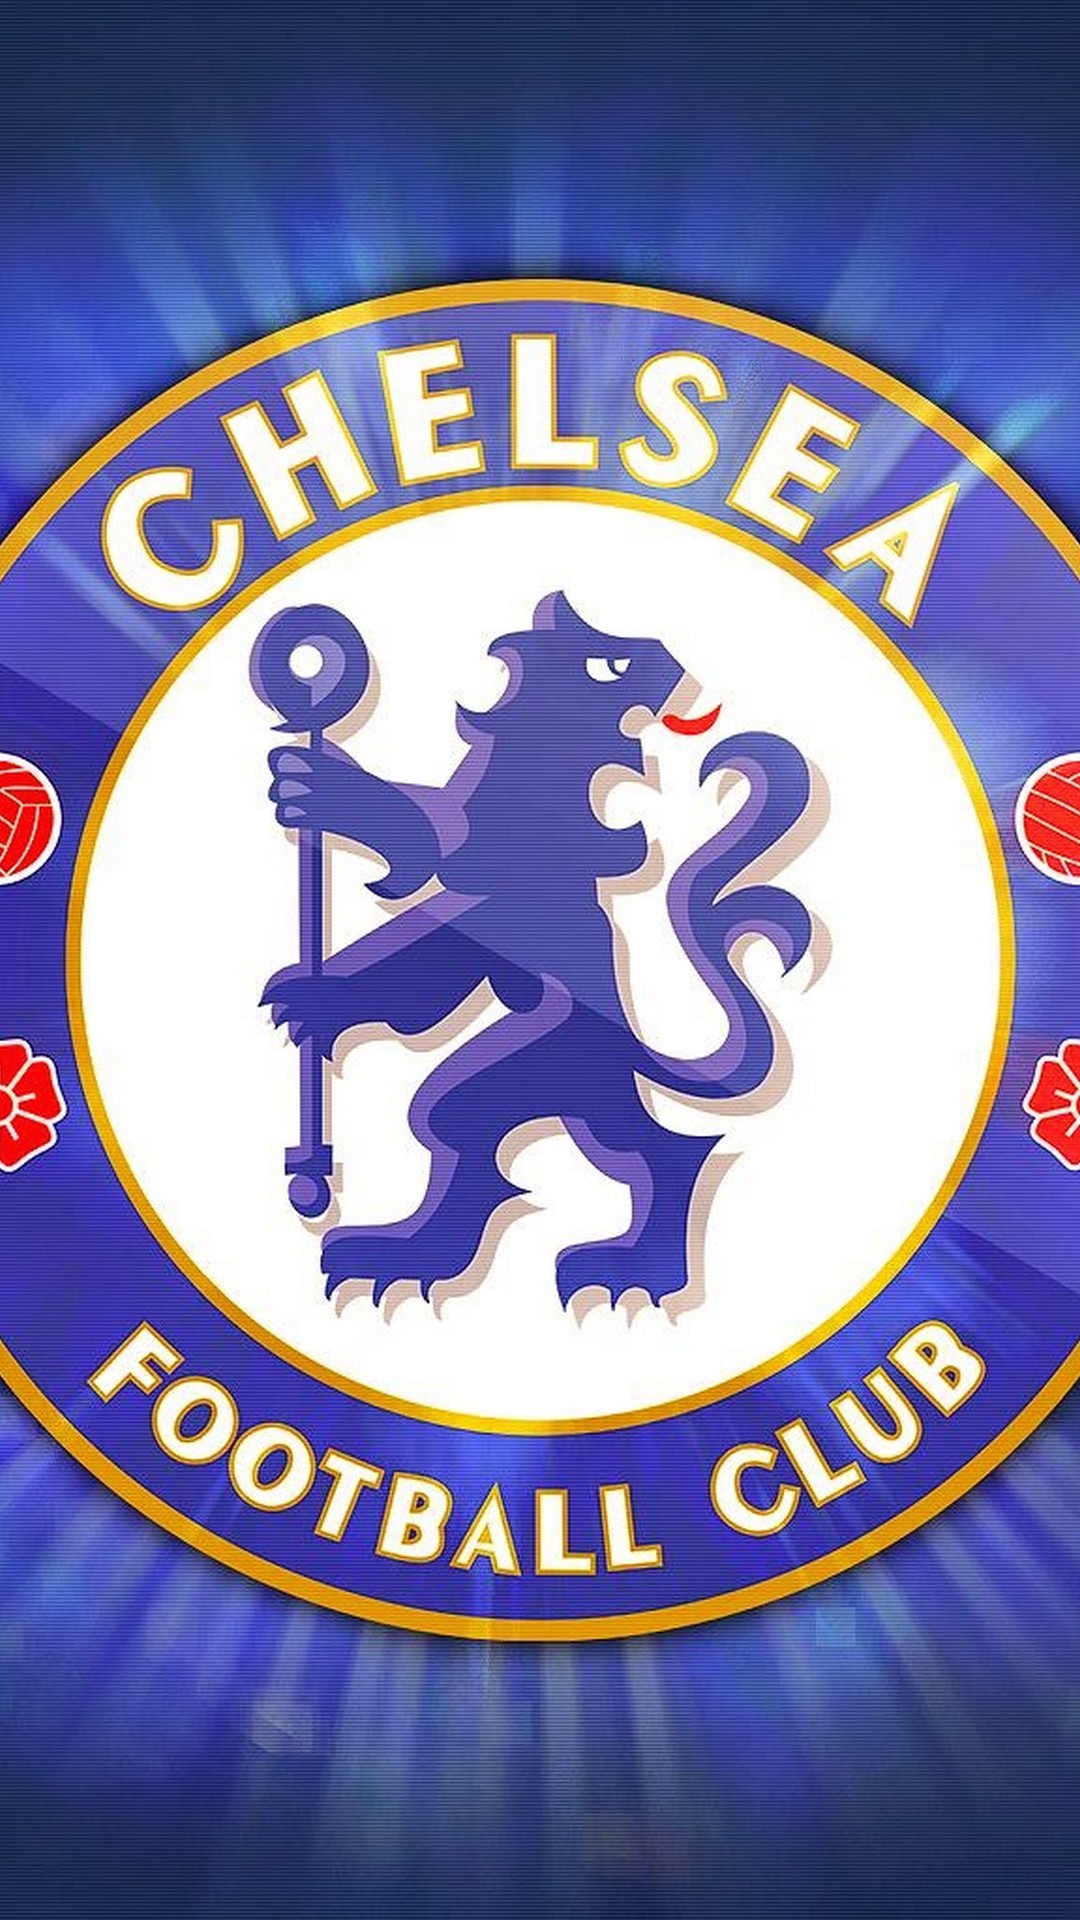 Wallpaper Chelsea iPhone With Resolution 1080X1920 pixel. You can make this wallpaper for your Mac or Windows Desktop Background, iPhone, Android or Tablet and another Smartphone device for free